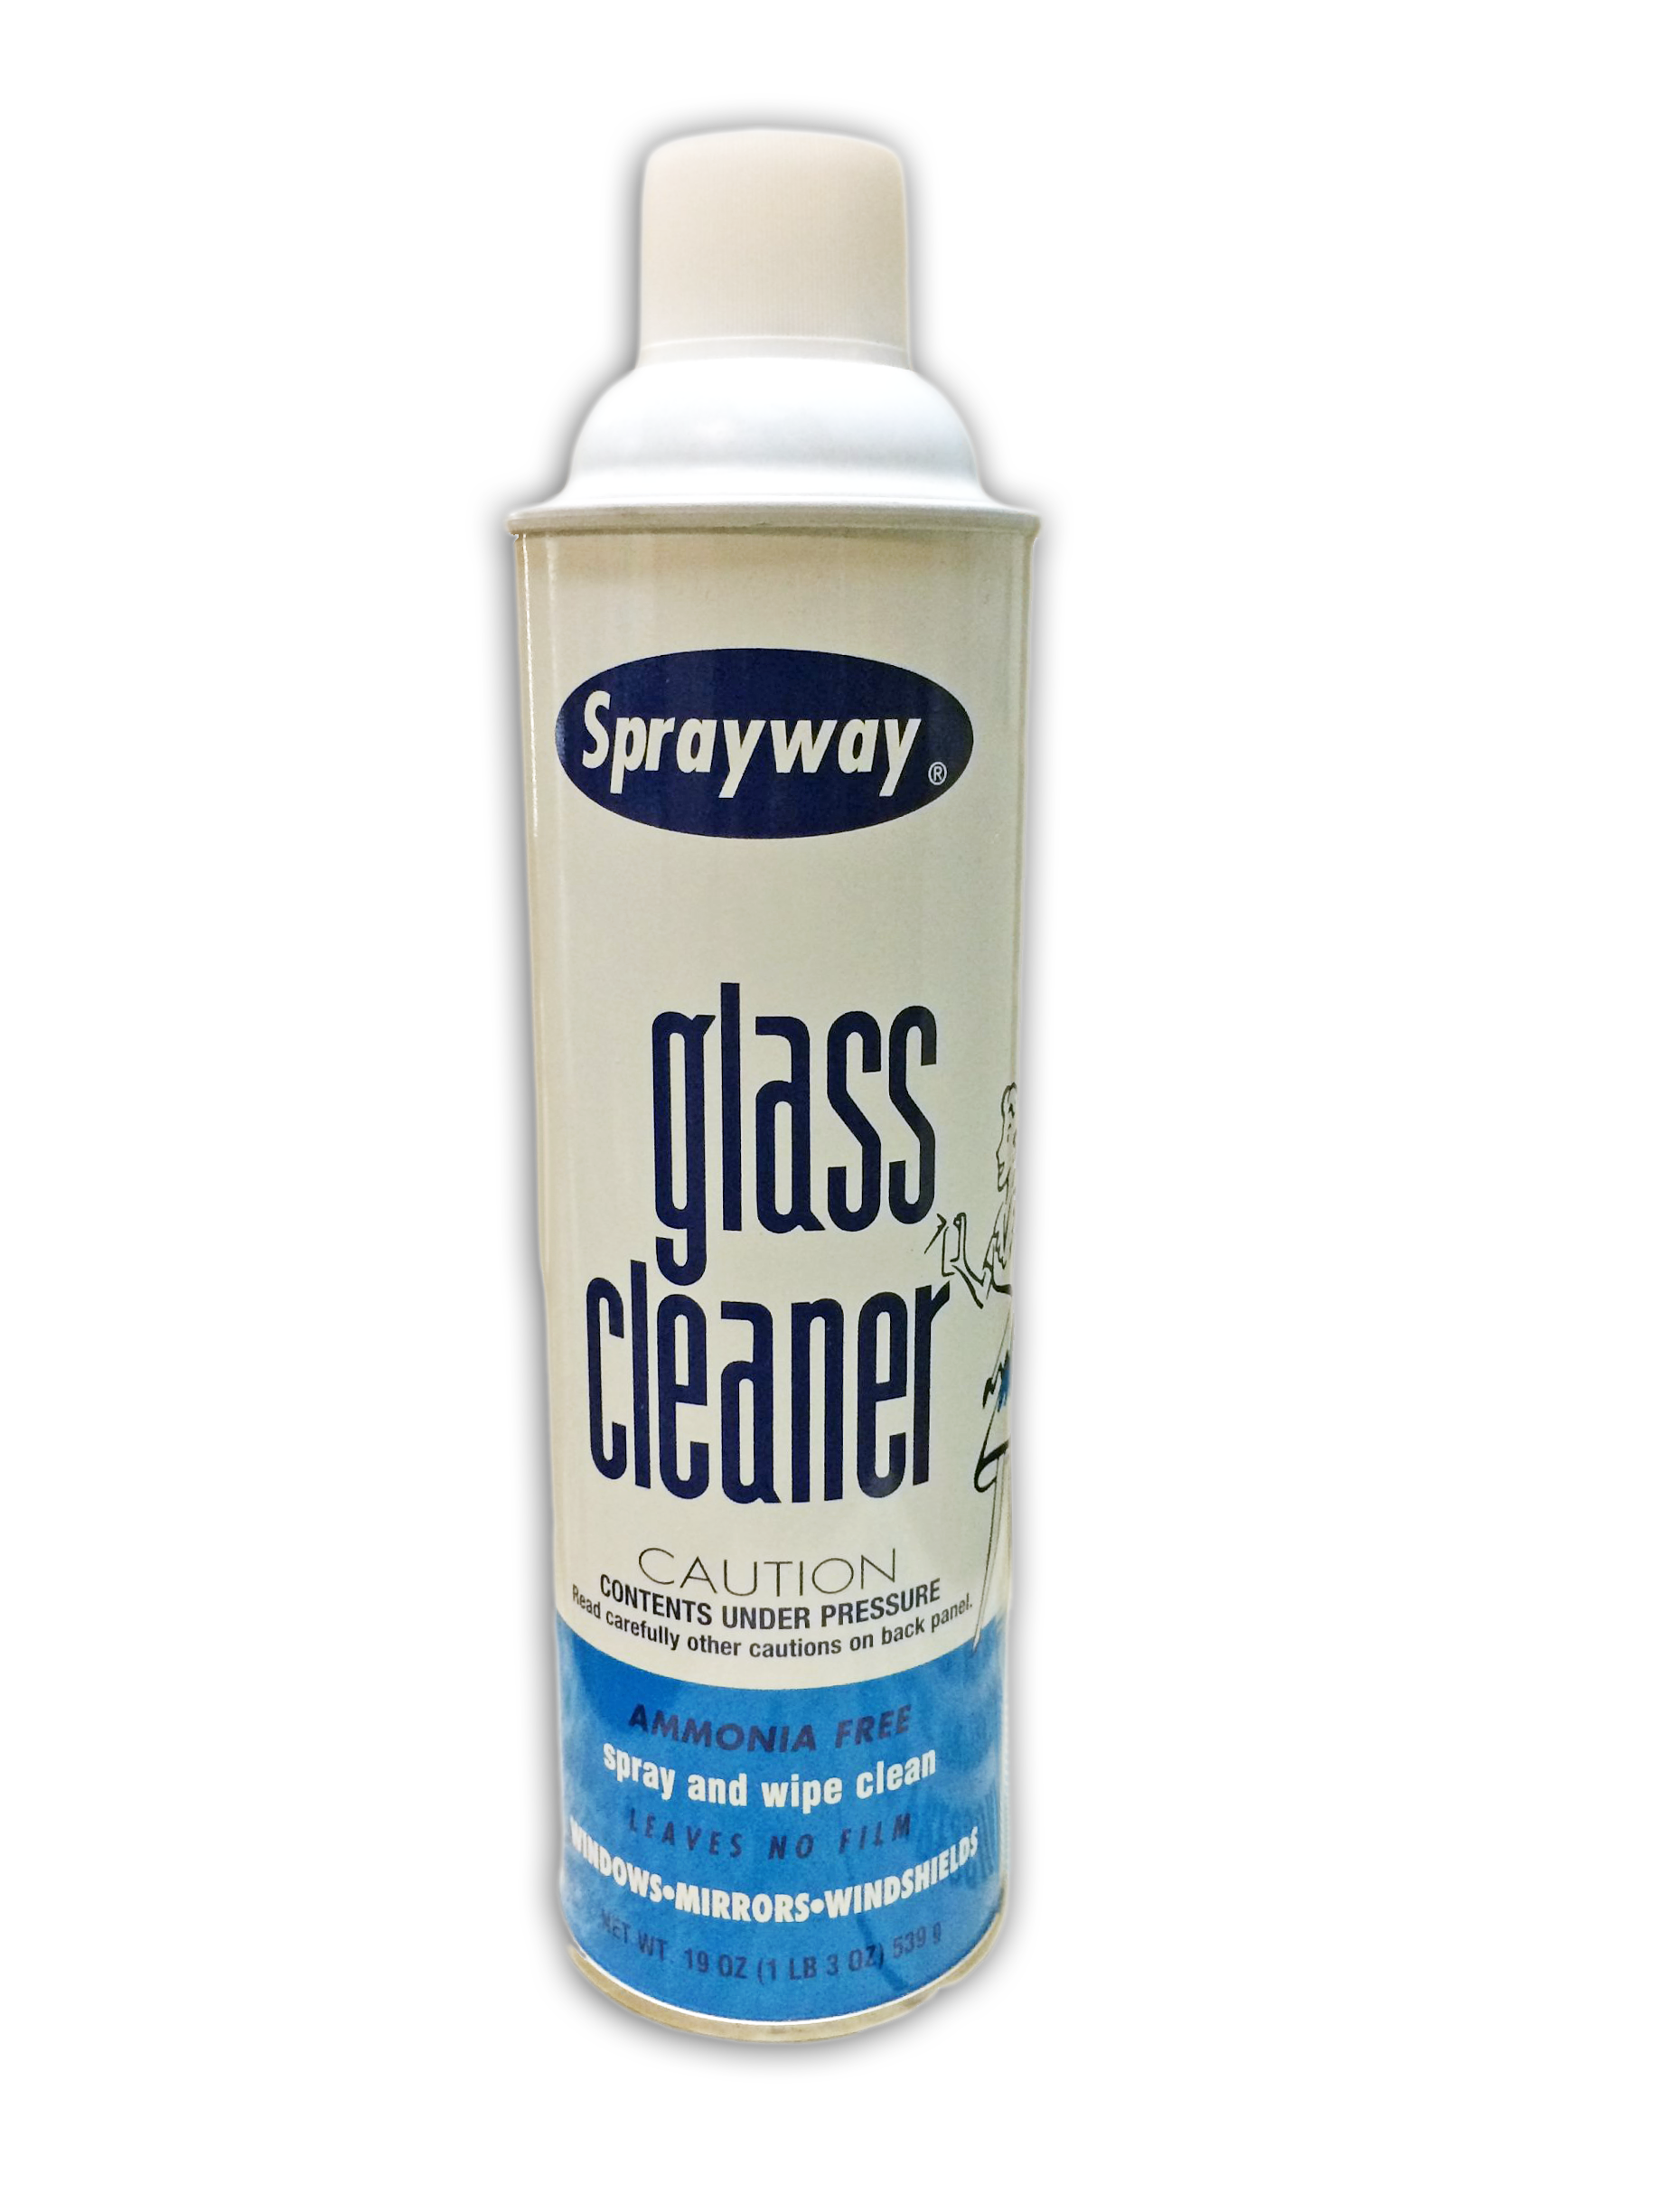 SPRAYAWAY GLASS CLEANER- EPA COMPLIANT 092110 - WORLD'S FINEST CAR CARE  PRODUCTS